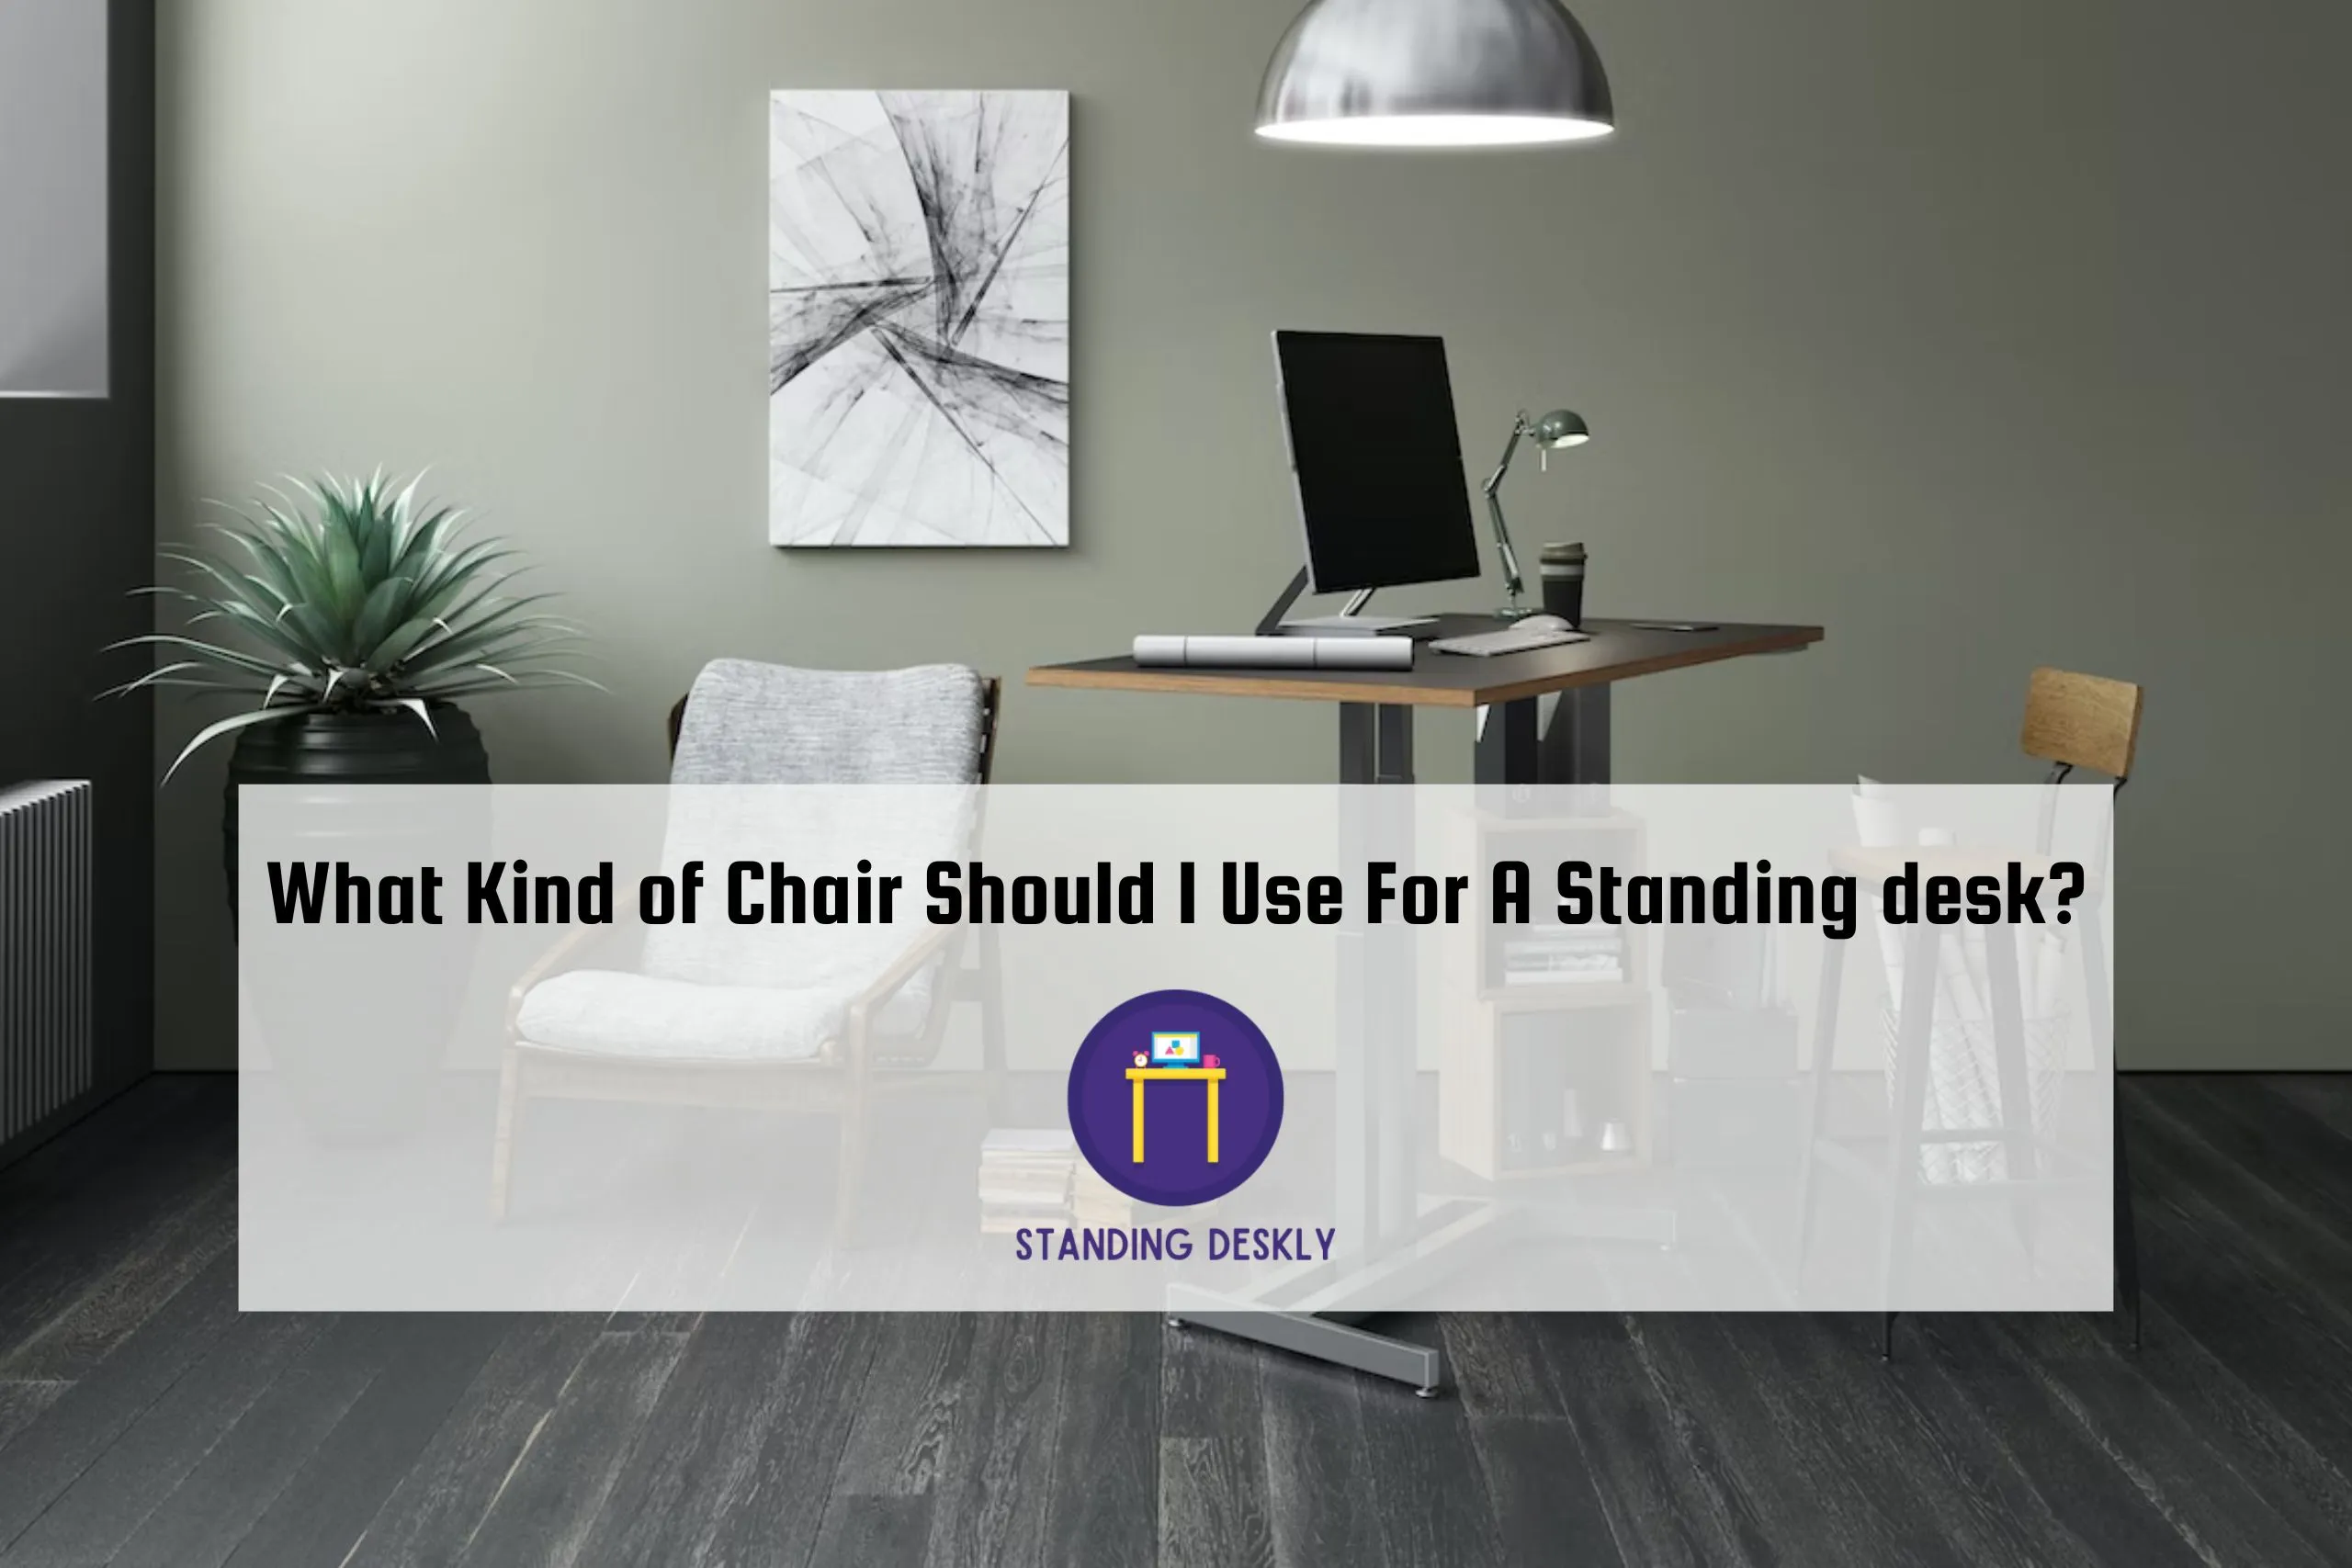 What Kind of Chair Should I Use For A Standing desk